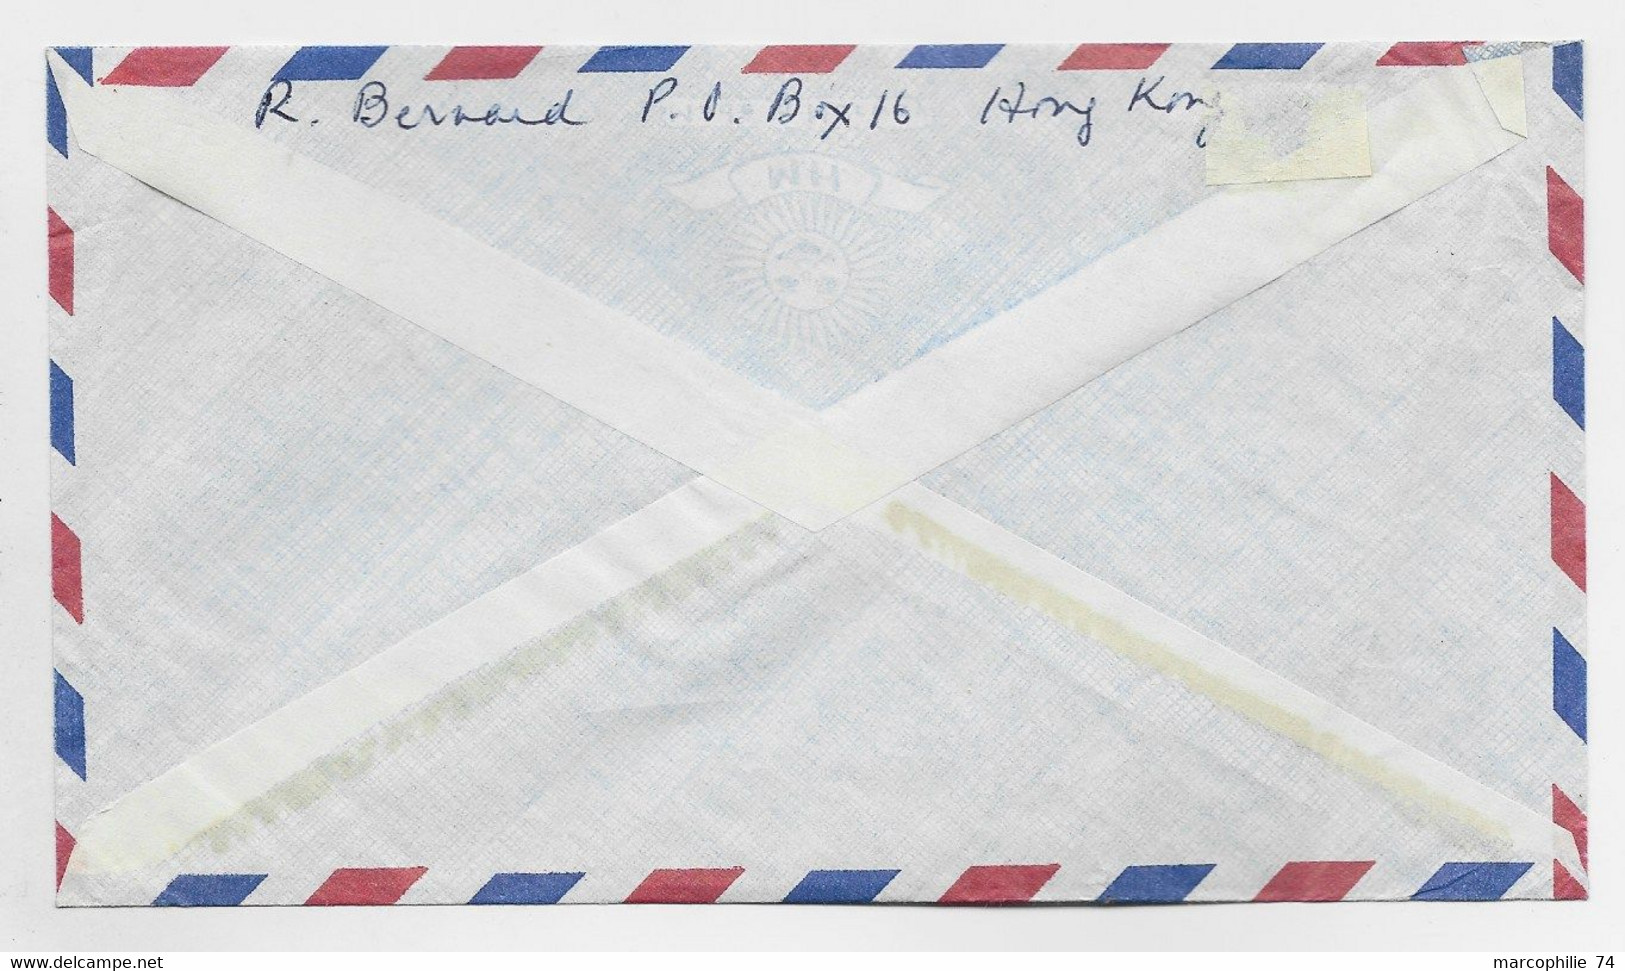 EMA HONG KONG 0130 CENTS VICTORIA 22.XII.1962 LETTRE COVER AIR MAIL TO FRANCE - Distributeurs